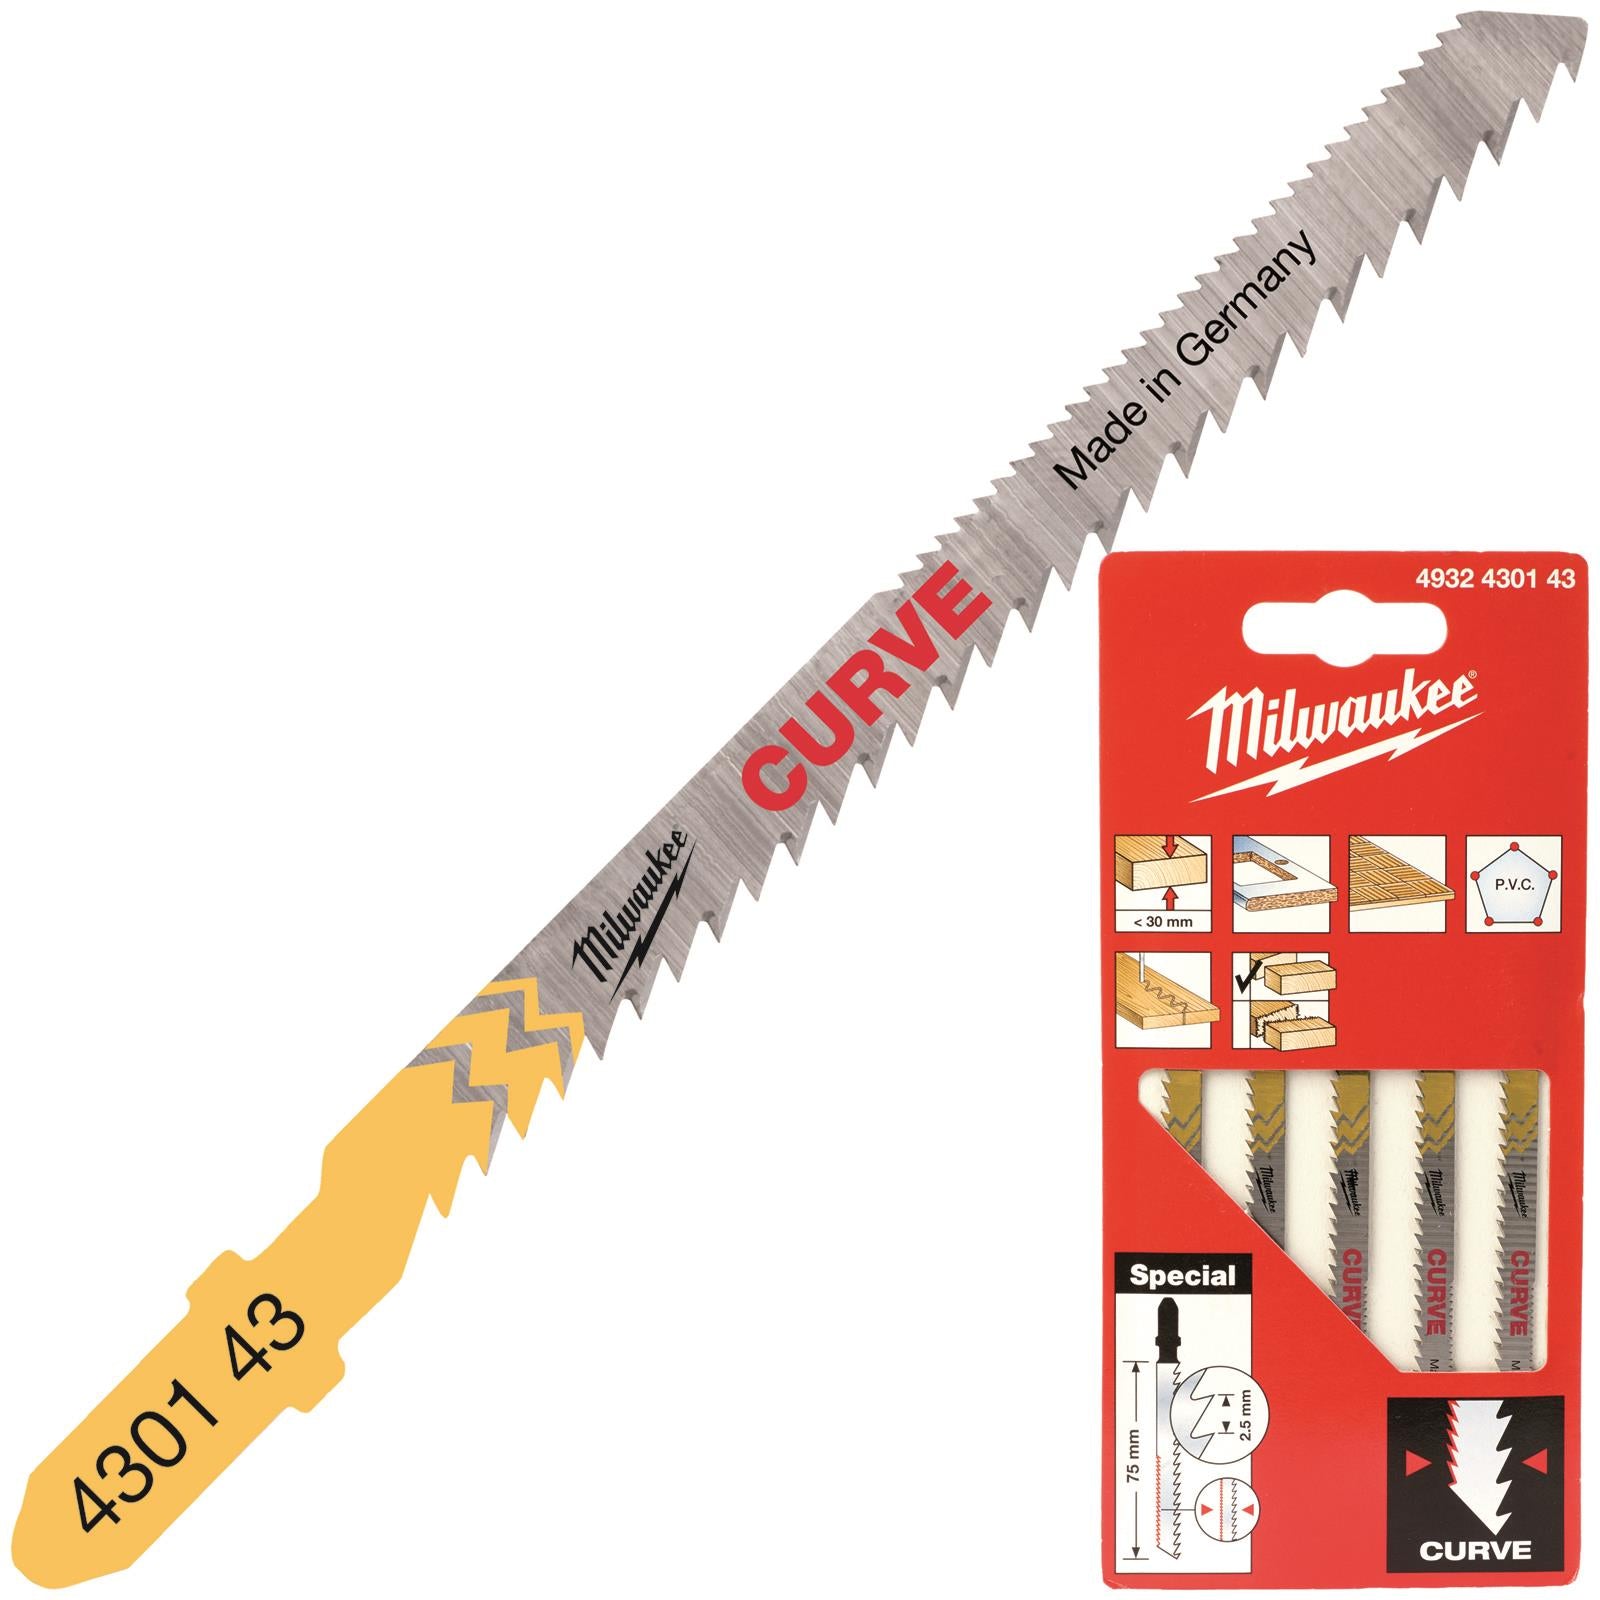 Milwaukee Jigsaw Blades Wood and Plastic 5 Pack Curved Cutting Blade 75mm x 2.5mm